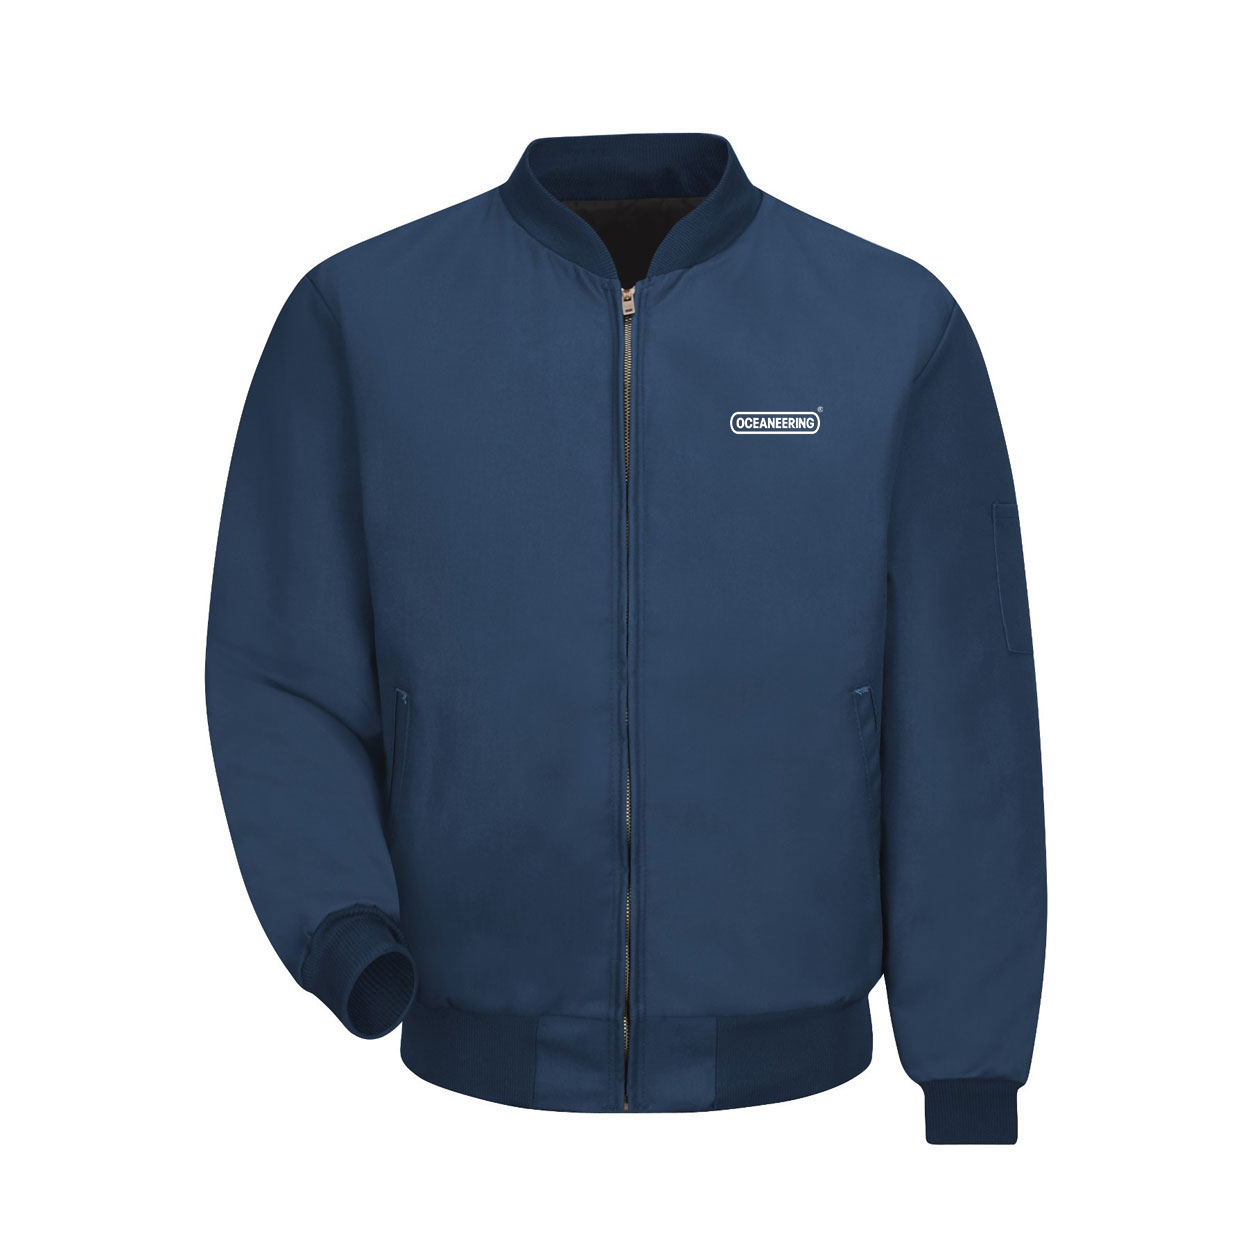 RED KAP LINED SOLID TEAM JACKET - NAVY 